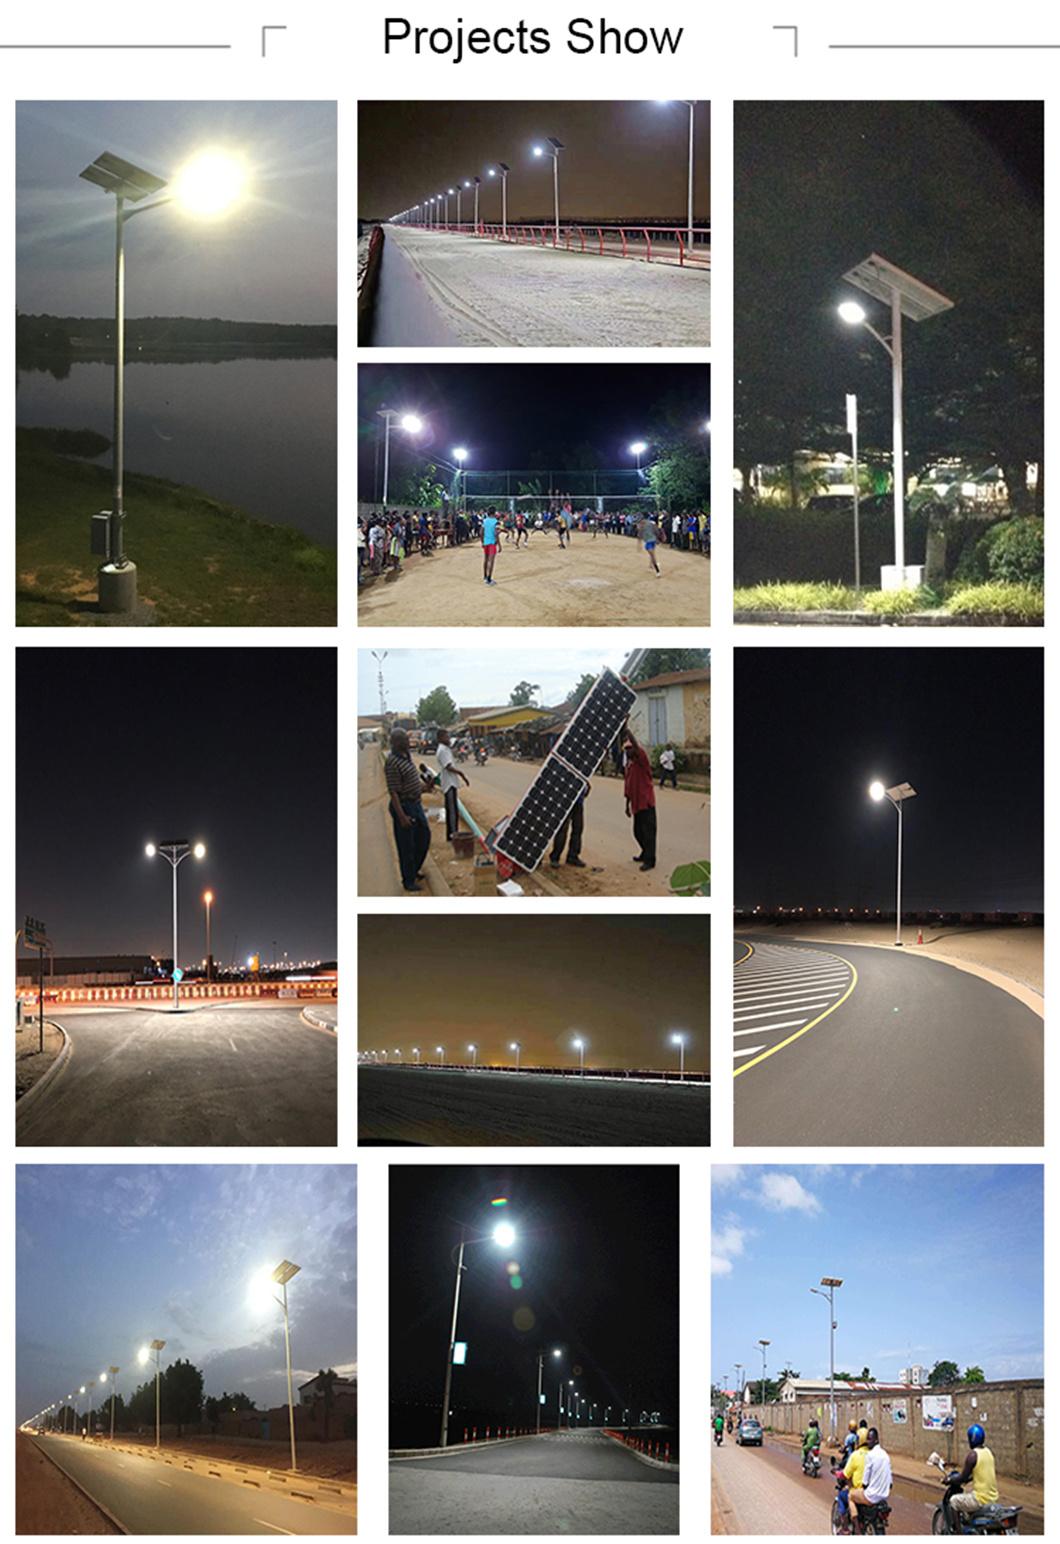 Outdoor 80W Solar LED Street Light with Pole